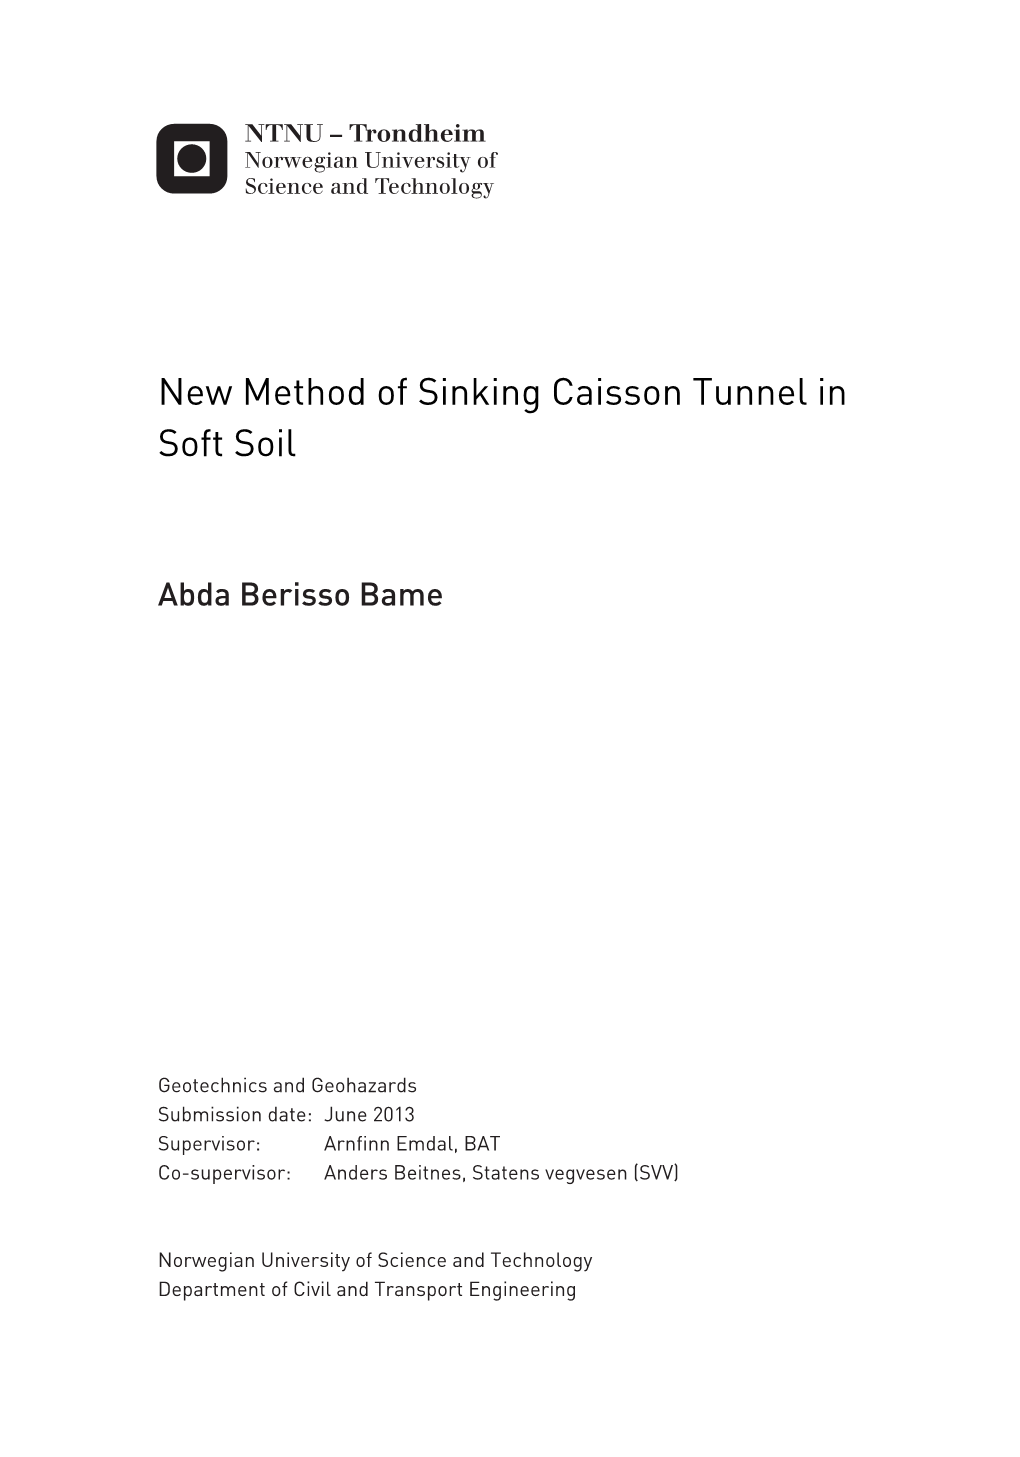 New Method of Sinking Caisson Tunnel in Soft Soil